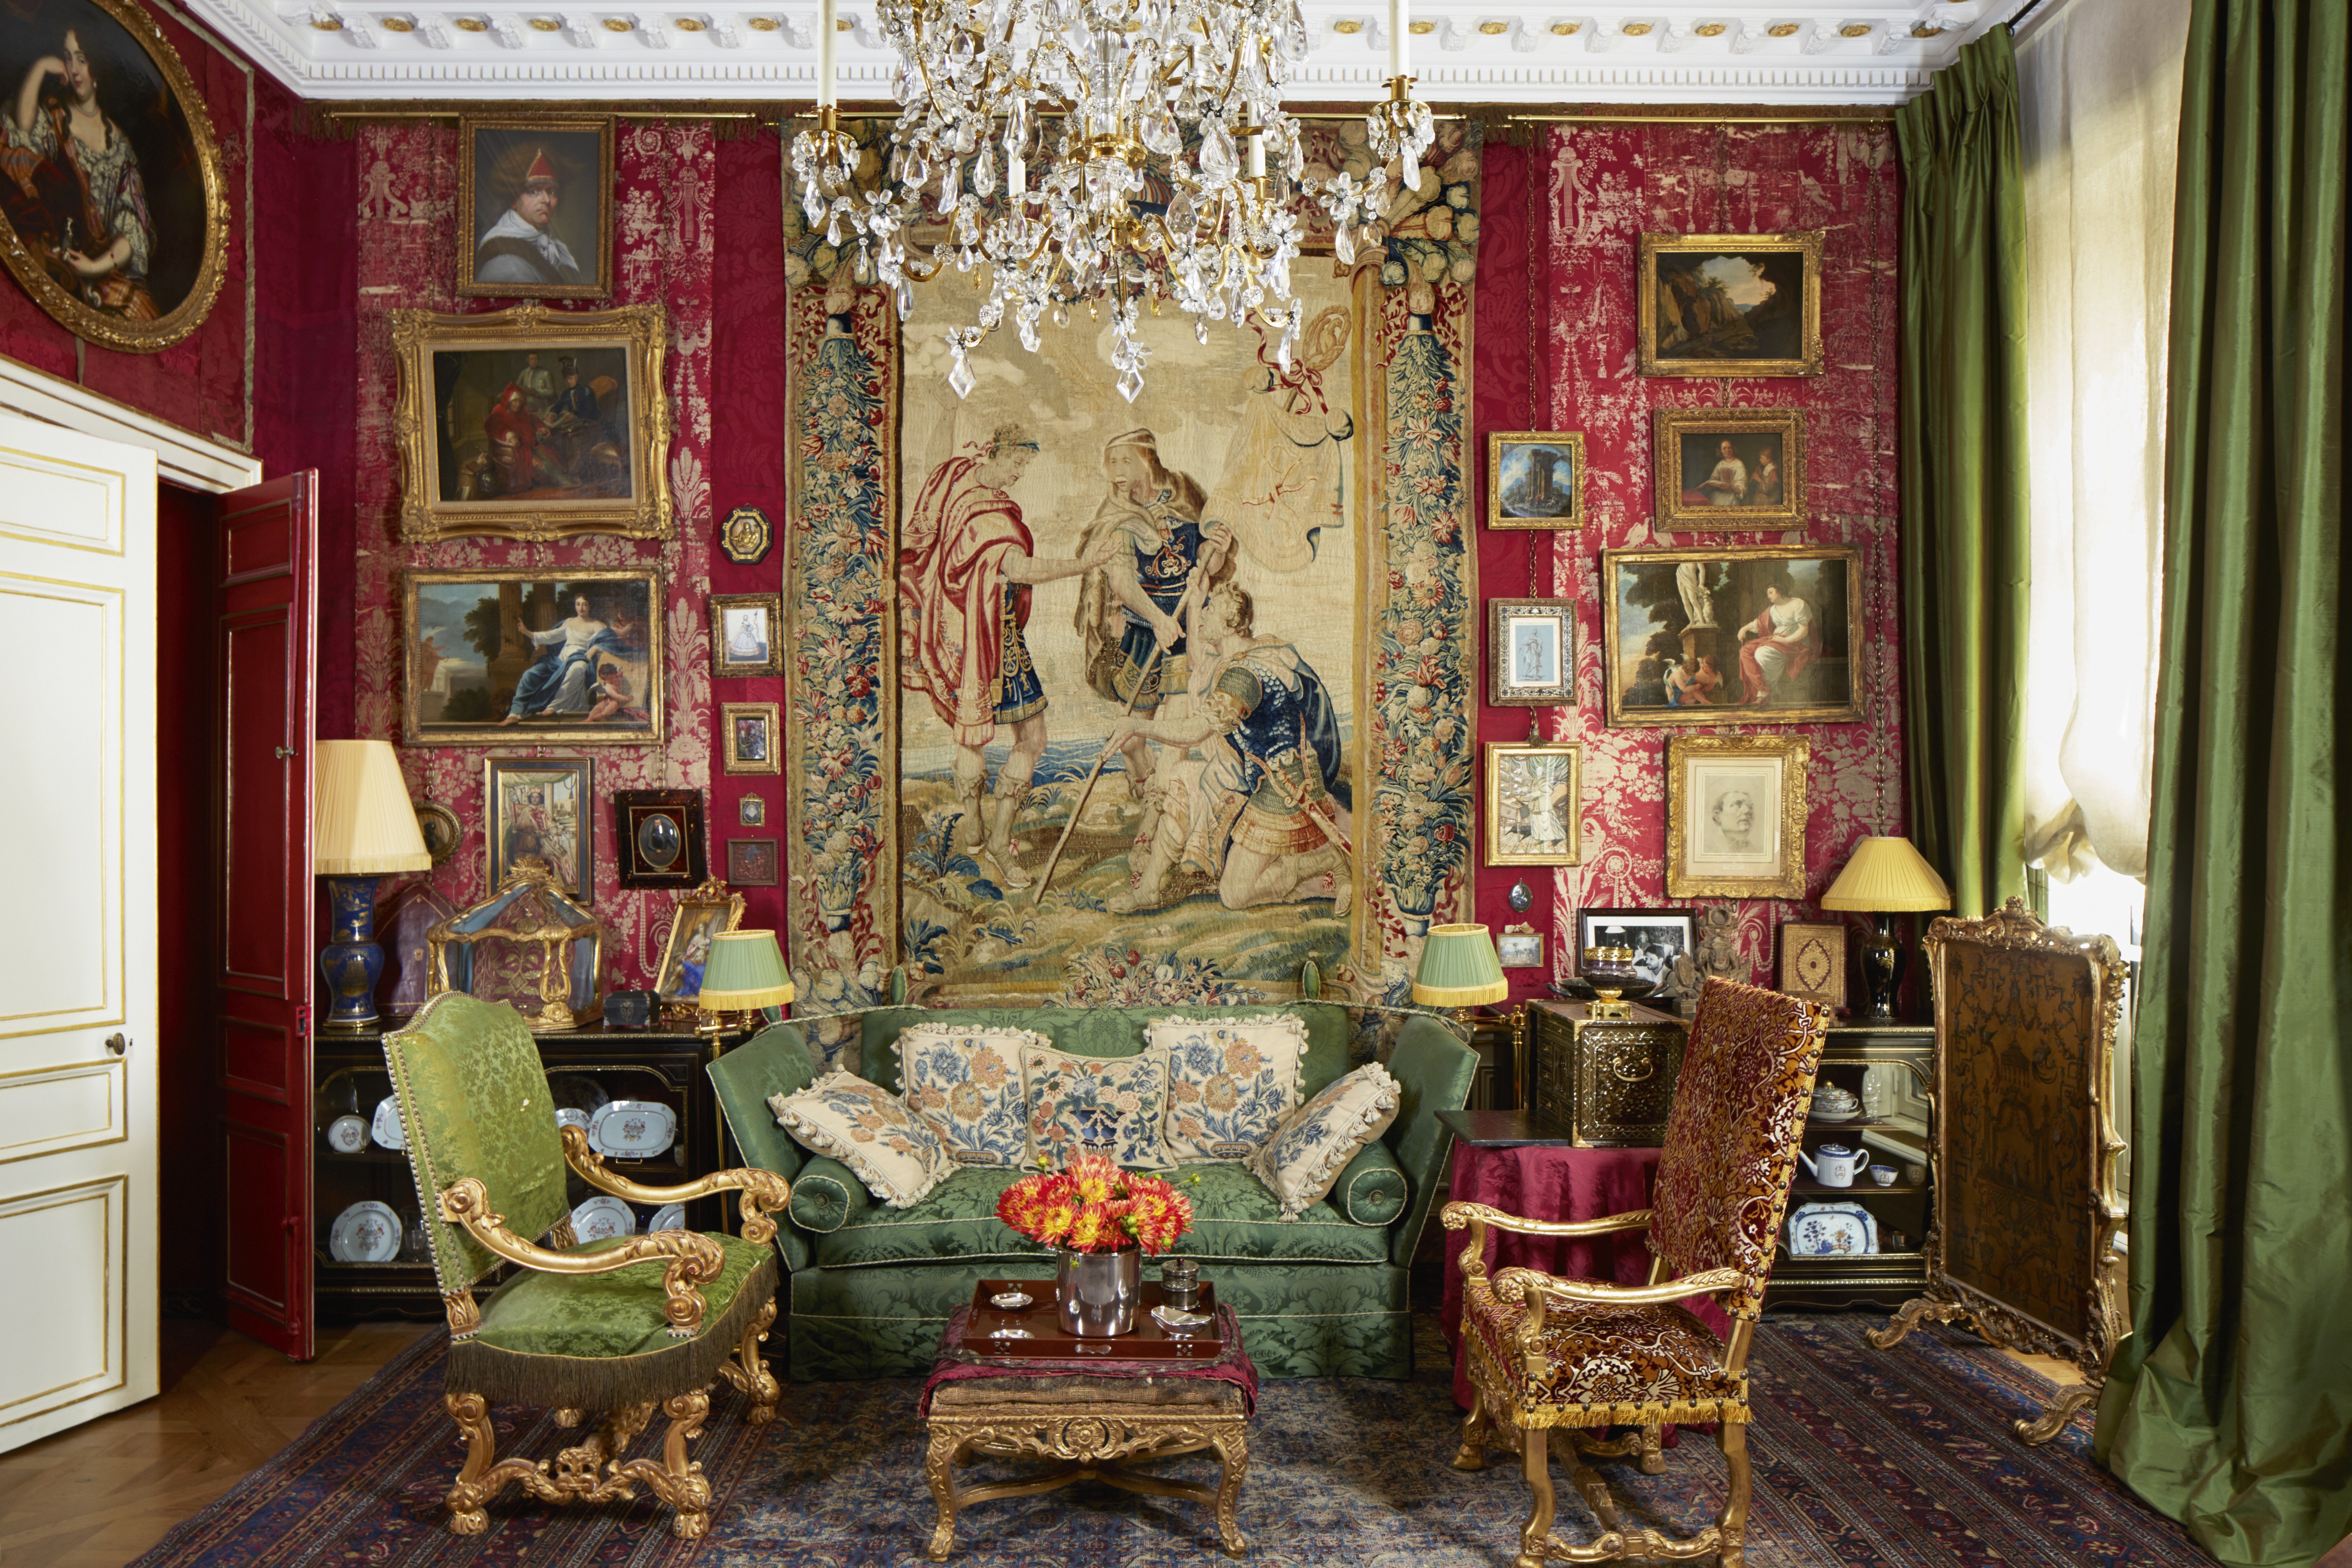 The 18th-century Parisian apartment of British design connoisseur Charles Garnett and his partner, gallery owner Sylvain Lévy-Alban, is steeped in heirlooms and history